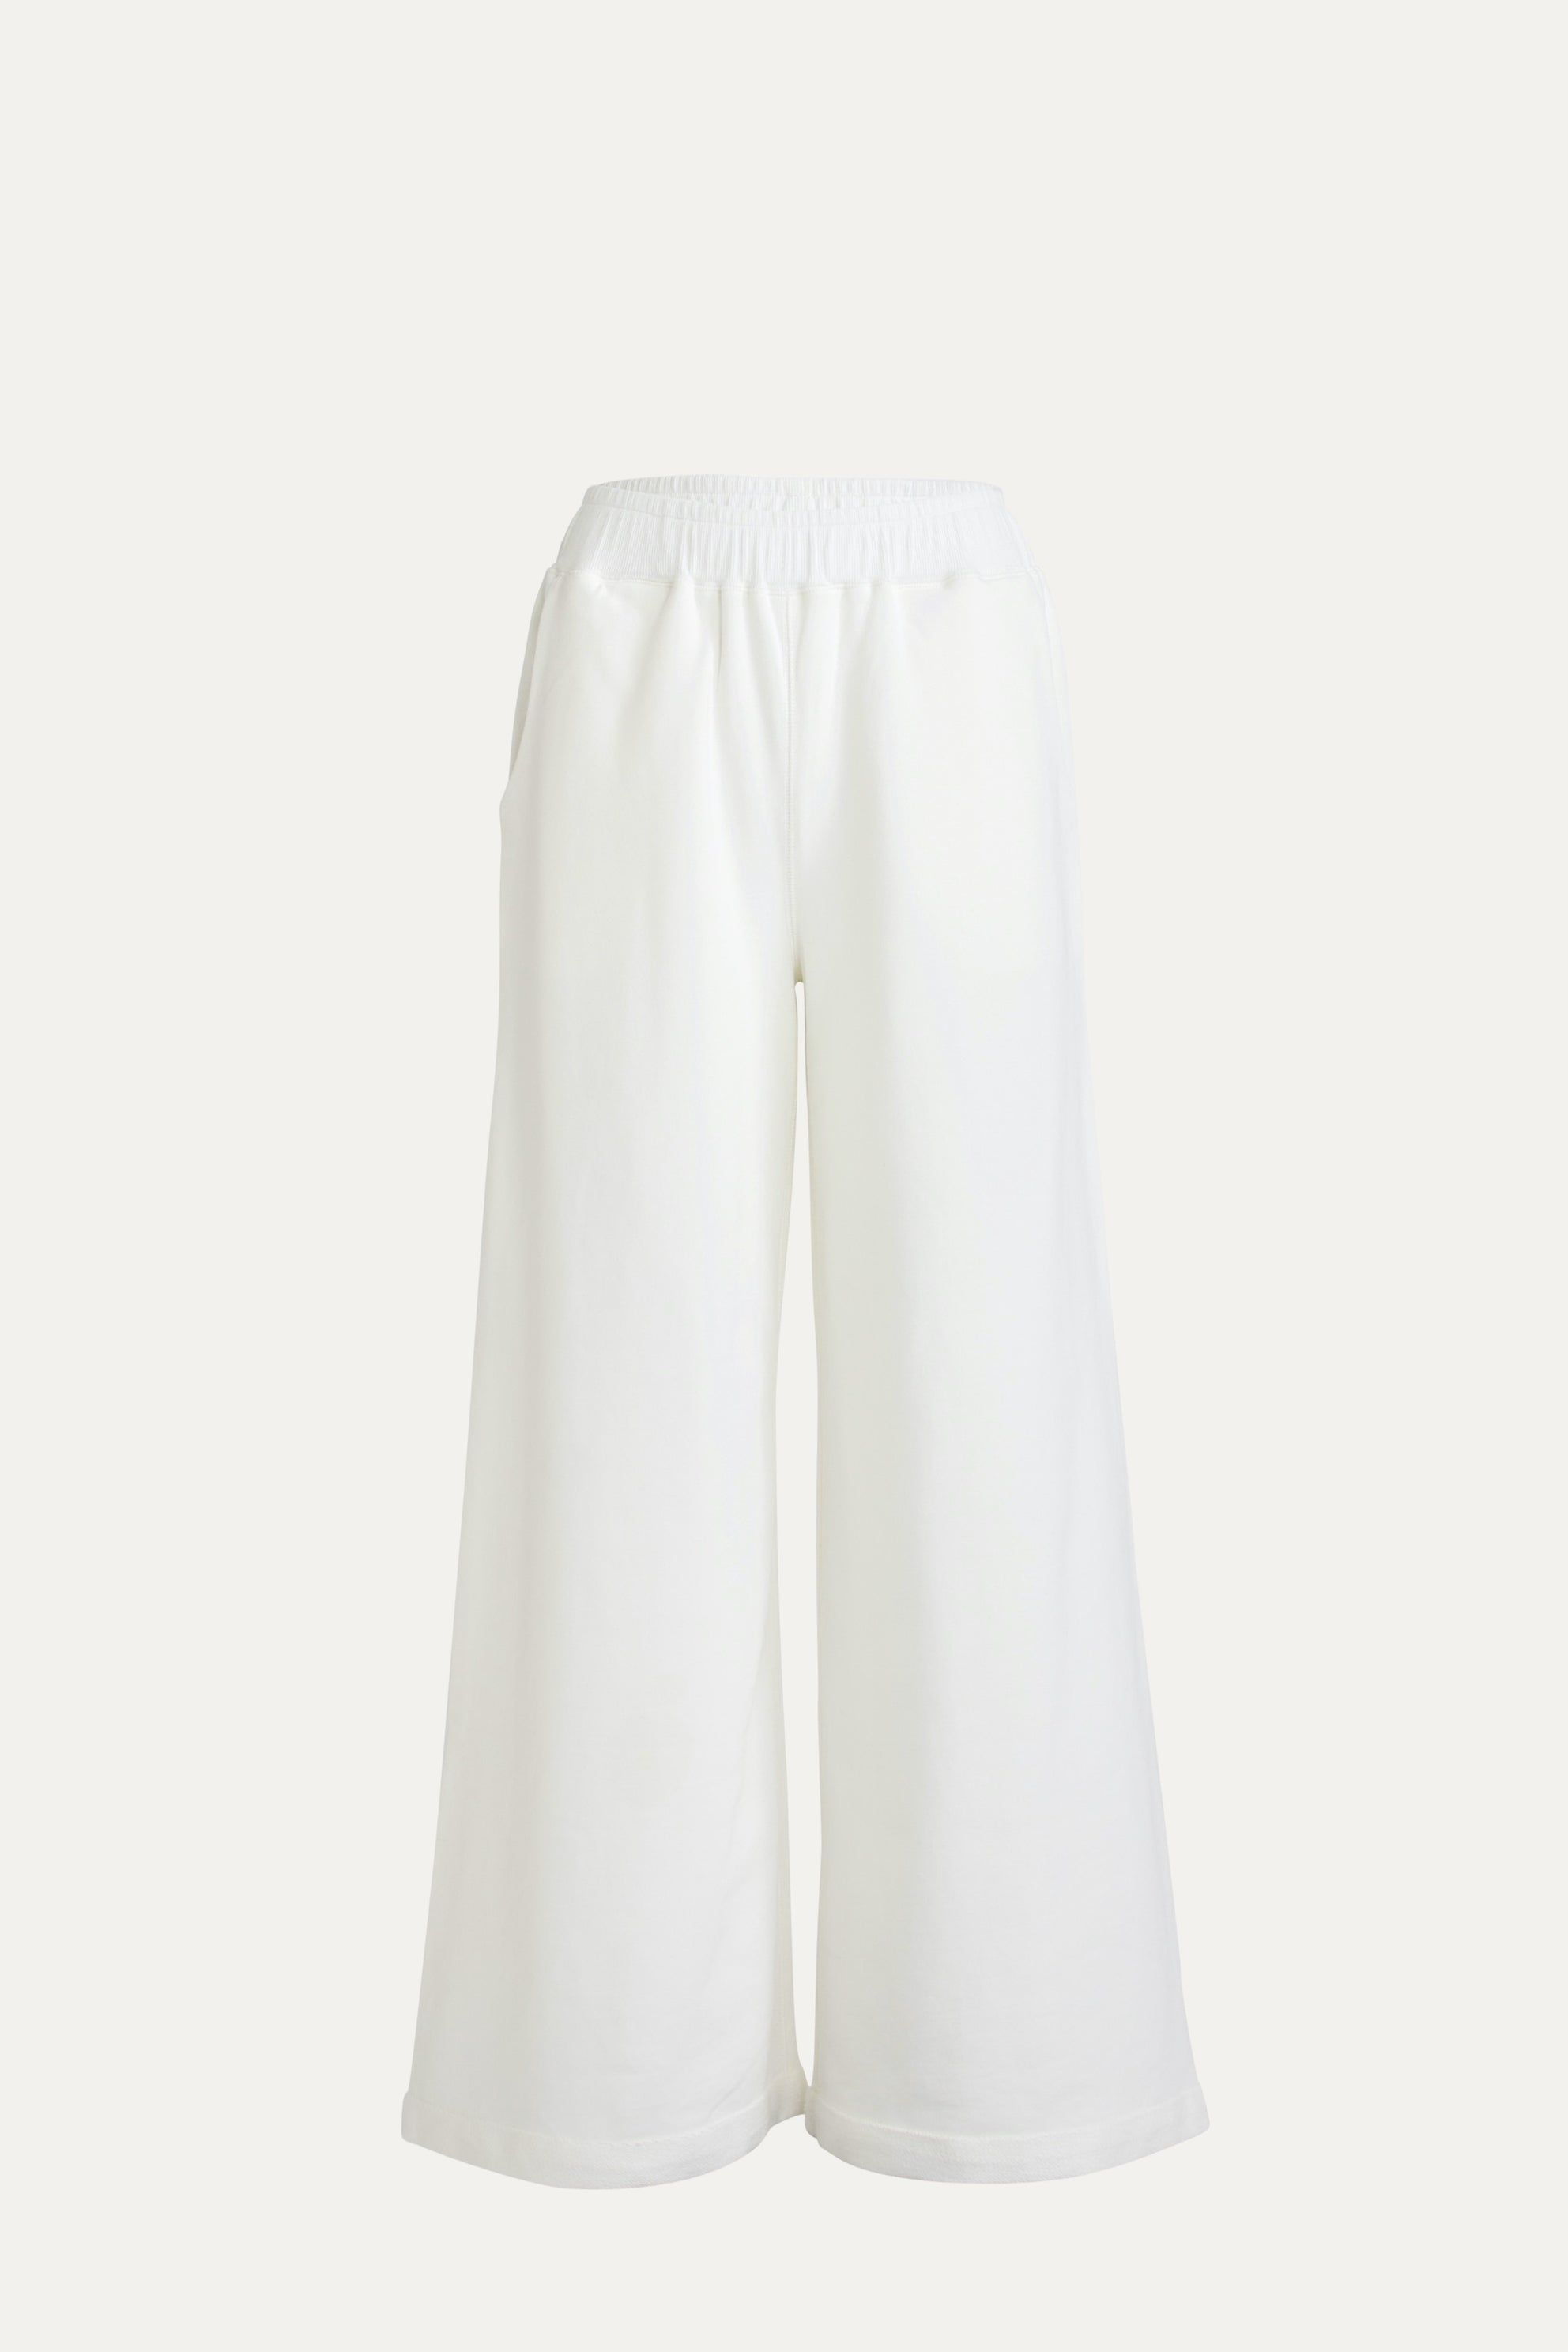 Adele Cotton Jersey Pants | Afterpay | FLANNEL America